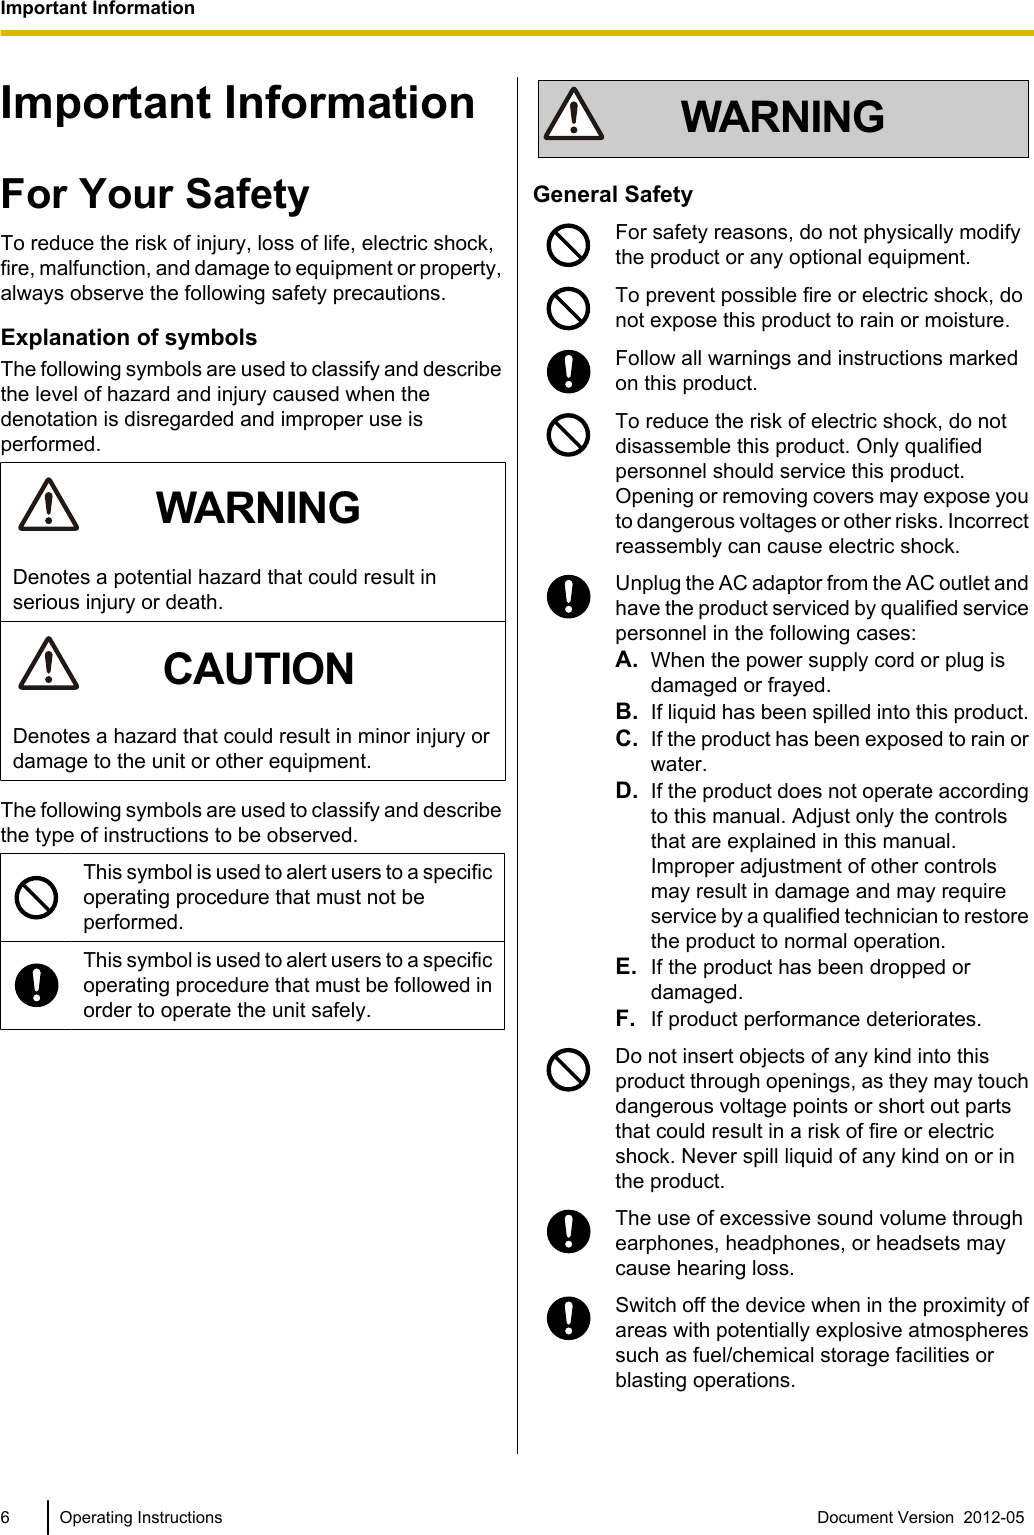 Important InformationFor Your SafetyTo reduce the risk of injury, loss of life, electric shock,fire, malfunction, and damage to equipment or property,always observe the following safety precautions.Explanation of symbolsThe following symbols are used to classify and describethe level of hazard and injury caused when thedenotation is disregarded and improper use isperformed.WARNINGDenotes a potential hazard that could result inserious injury or death.CAUTIONDenotes a hazard that could result in minor injury ordamage to the unit or other equipment.The following symbols are used to classify and describethe type of instructions to be observed.This symbol is used to alert users to a specificoperating procedure that must not beperformed.This symbol is used to alert users to a specificoperating procedure that must be followed inorder to operate the unit safely.WARNINGGeneral SafetyFor safety reasons, do not physically modifythe product or any optional equipment.To prevent possible fire or electric shock, donot expose this product to rain or moisture.Follow all warnings and instructions markedon this product.To reduce the risk of electric shock, do notdisassemble this product. Only qualifiedpersonnel should service this product.Opening or removing covers may expose youto dangerous voltages or other risks. Incorrectreassembly can cause electric shock.Unplug the AC adaptor from the AC outlet andhave the product serviced by qualified servicepersonnel in the following cases:A. When the power supply cord or plug isdamaged or frayed.B. If liquid has been spilled into this product.C. If the product has been exposed to rain orwater.D. If the product does not operate accordingto this manual. Adjust only the controlsthat are explained in this manual.Improper adjustment of other controlsmay result in damage and may requireservice by a qualified technician to restorethe product to normal operation.E. If the product has been dropped ordamaged.F. If product performance deteriorates.Do not insert objects of any kind into thisproduct through openings, as they may touchdangerous voltage points or short out partsthat could result in a risk of fire or electricshock. Never spill liquid of any kind on or inthe product.The use of excessive sound volume throughearphones, headphones, or headsets maycause hearing loss.Switch off the device when in the proximity ofareas with potentially explosive atmospheressuch as fuel/chemical storage facilities orblasting operations.6 Operating Instructions Document Version  2012-05  Important Information